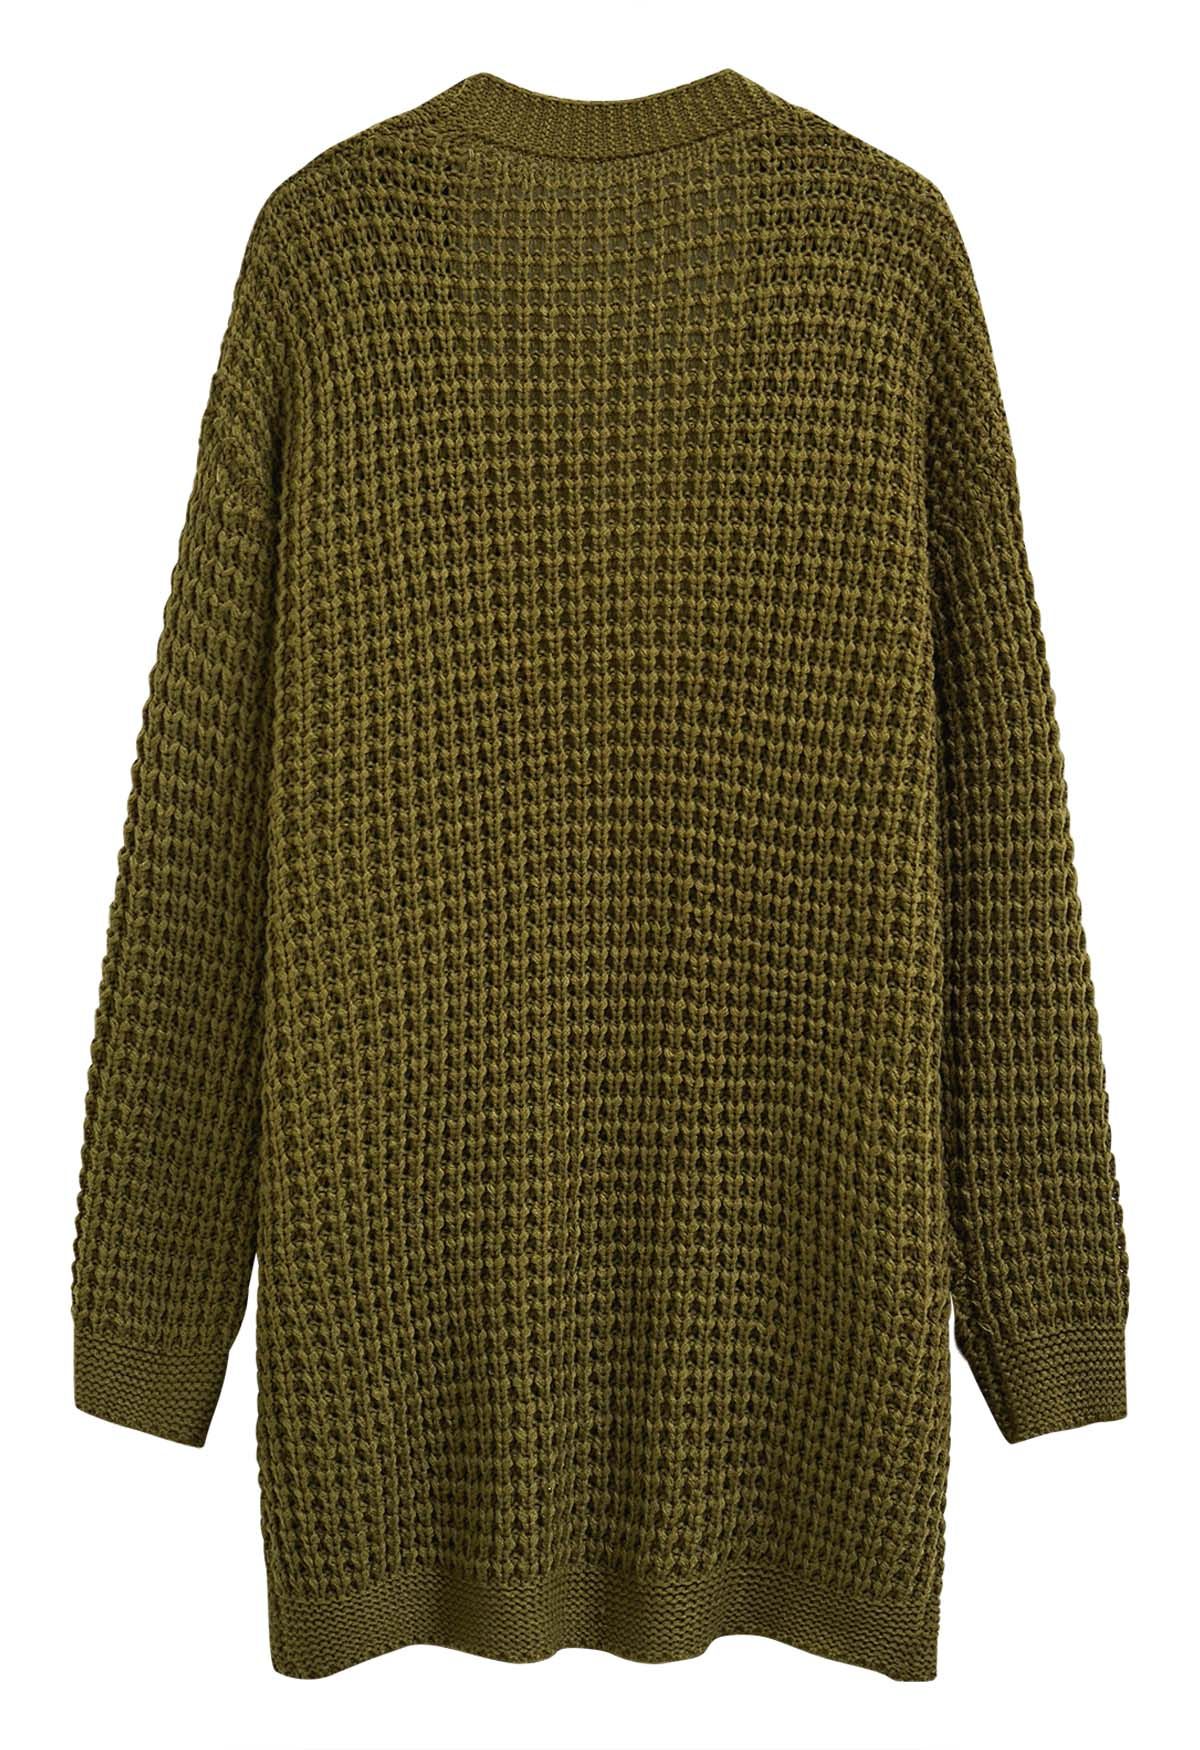 Batwing-Sleeve Pockets Waffle Knit Cardigan in Olive